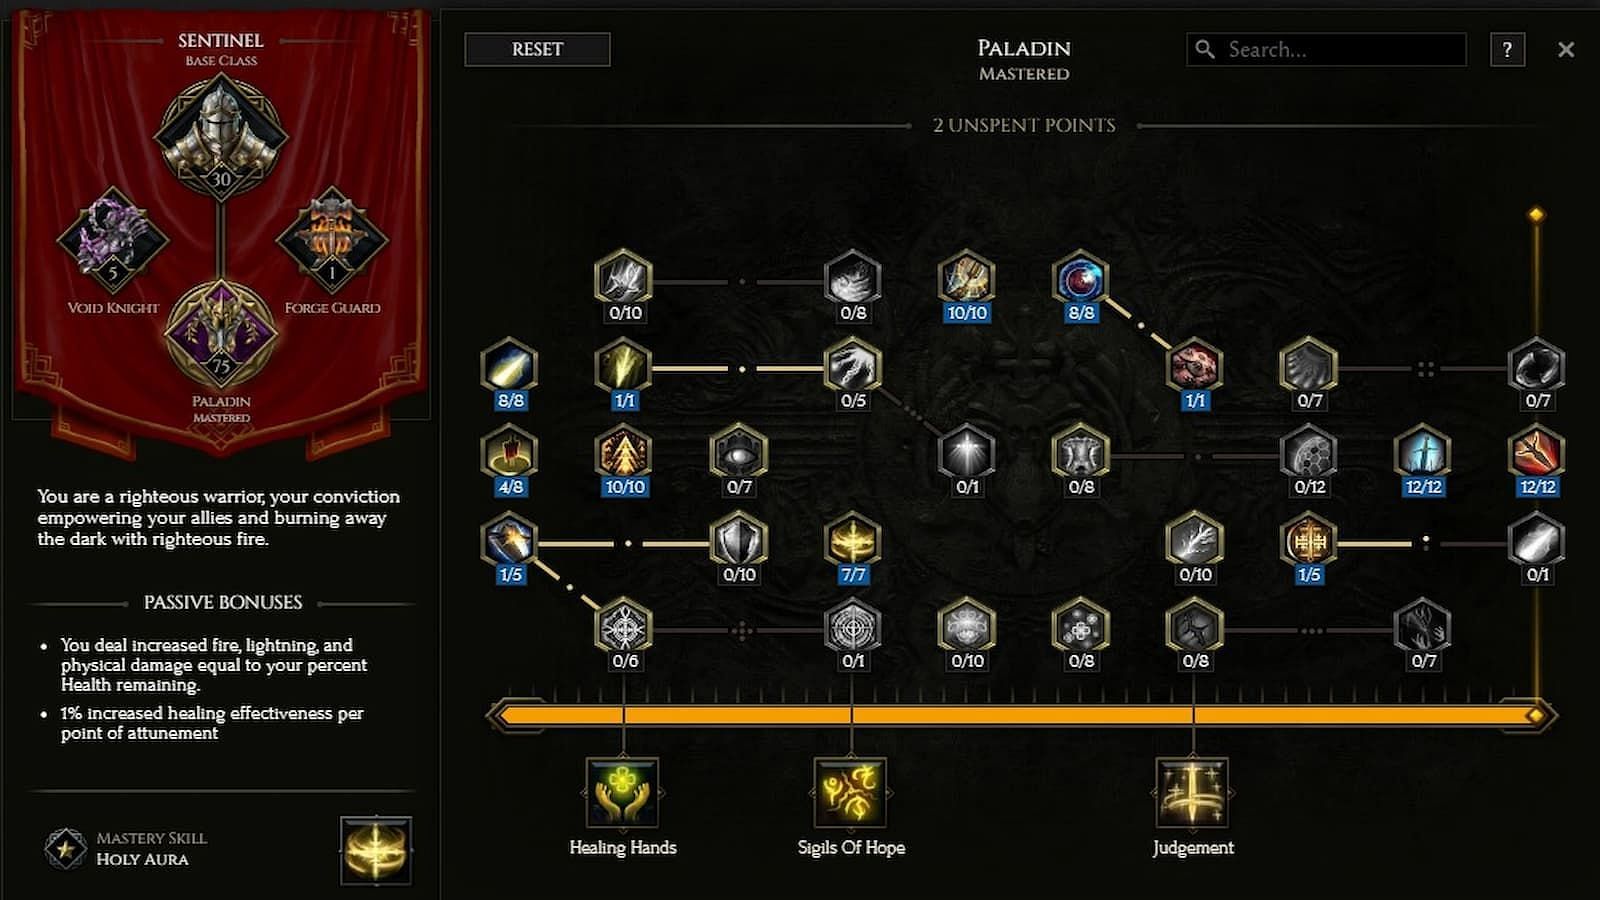 Paladin Skill tree for this build (Image via Last Epoch Tools/Eleventh Hour Games)